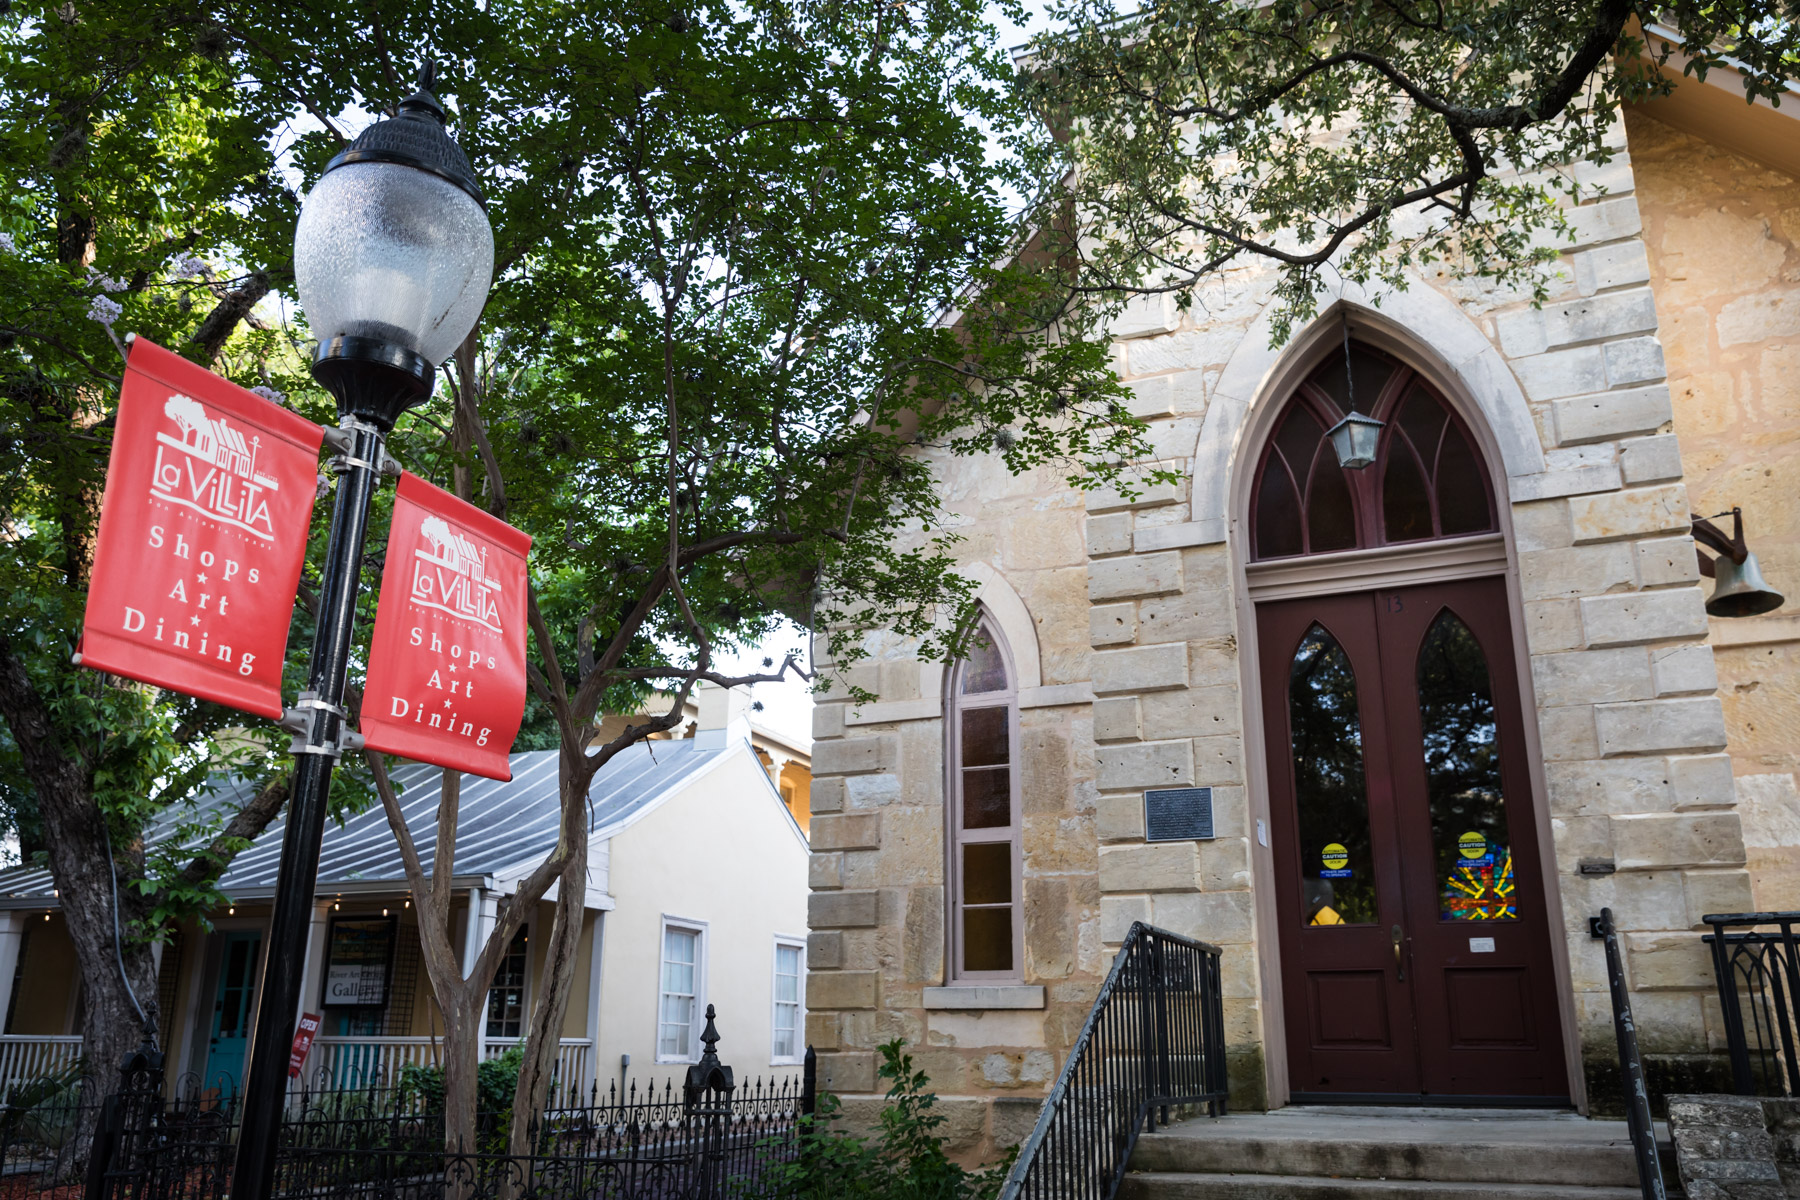 Entrance to church with red sign in La Villita for an article on the perfect downtown San Antonio family portrait itinerary